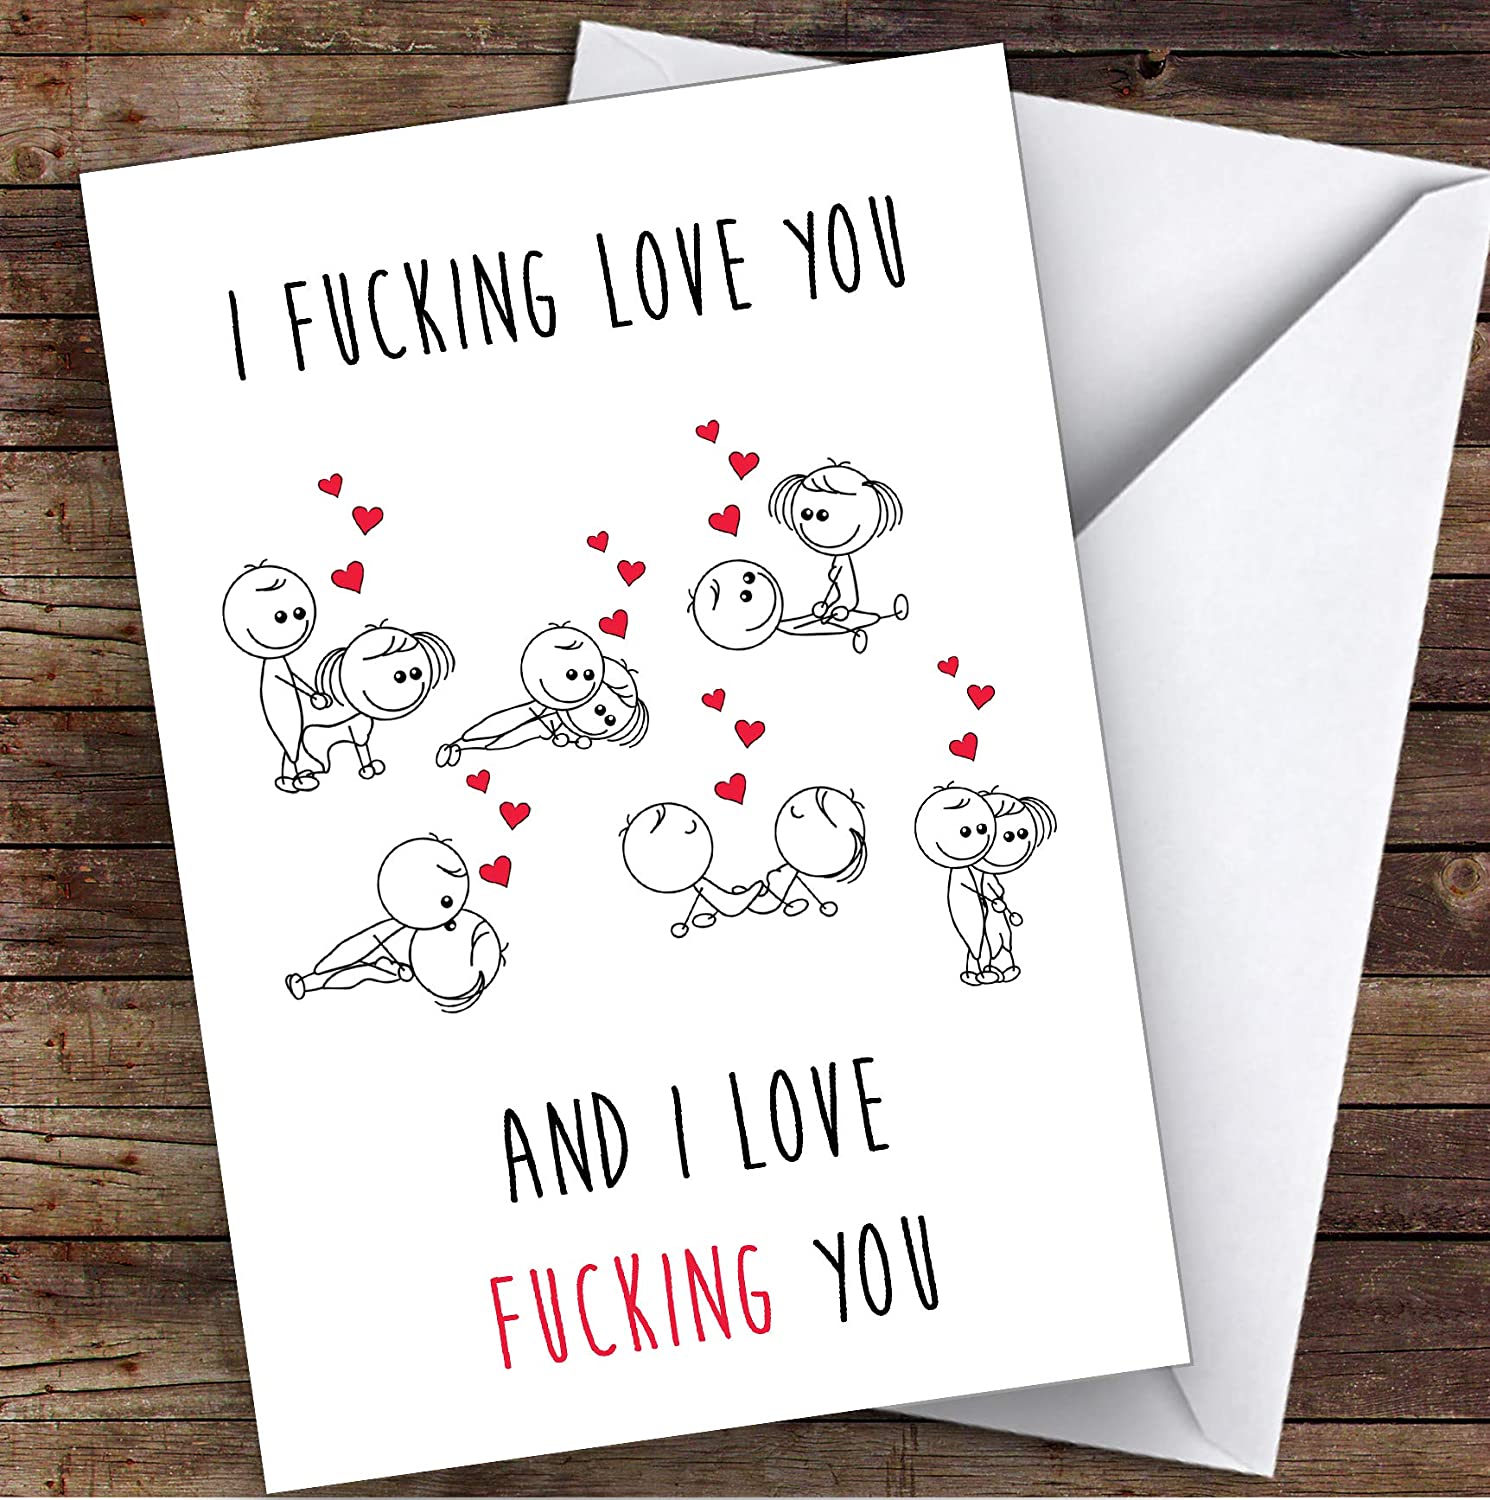 Rude Dirty Funny Love You Sexy Personalized Valentine's Day Greetings Card